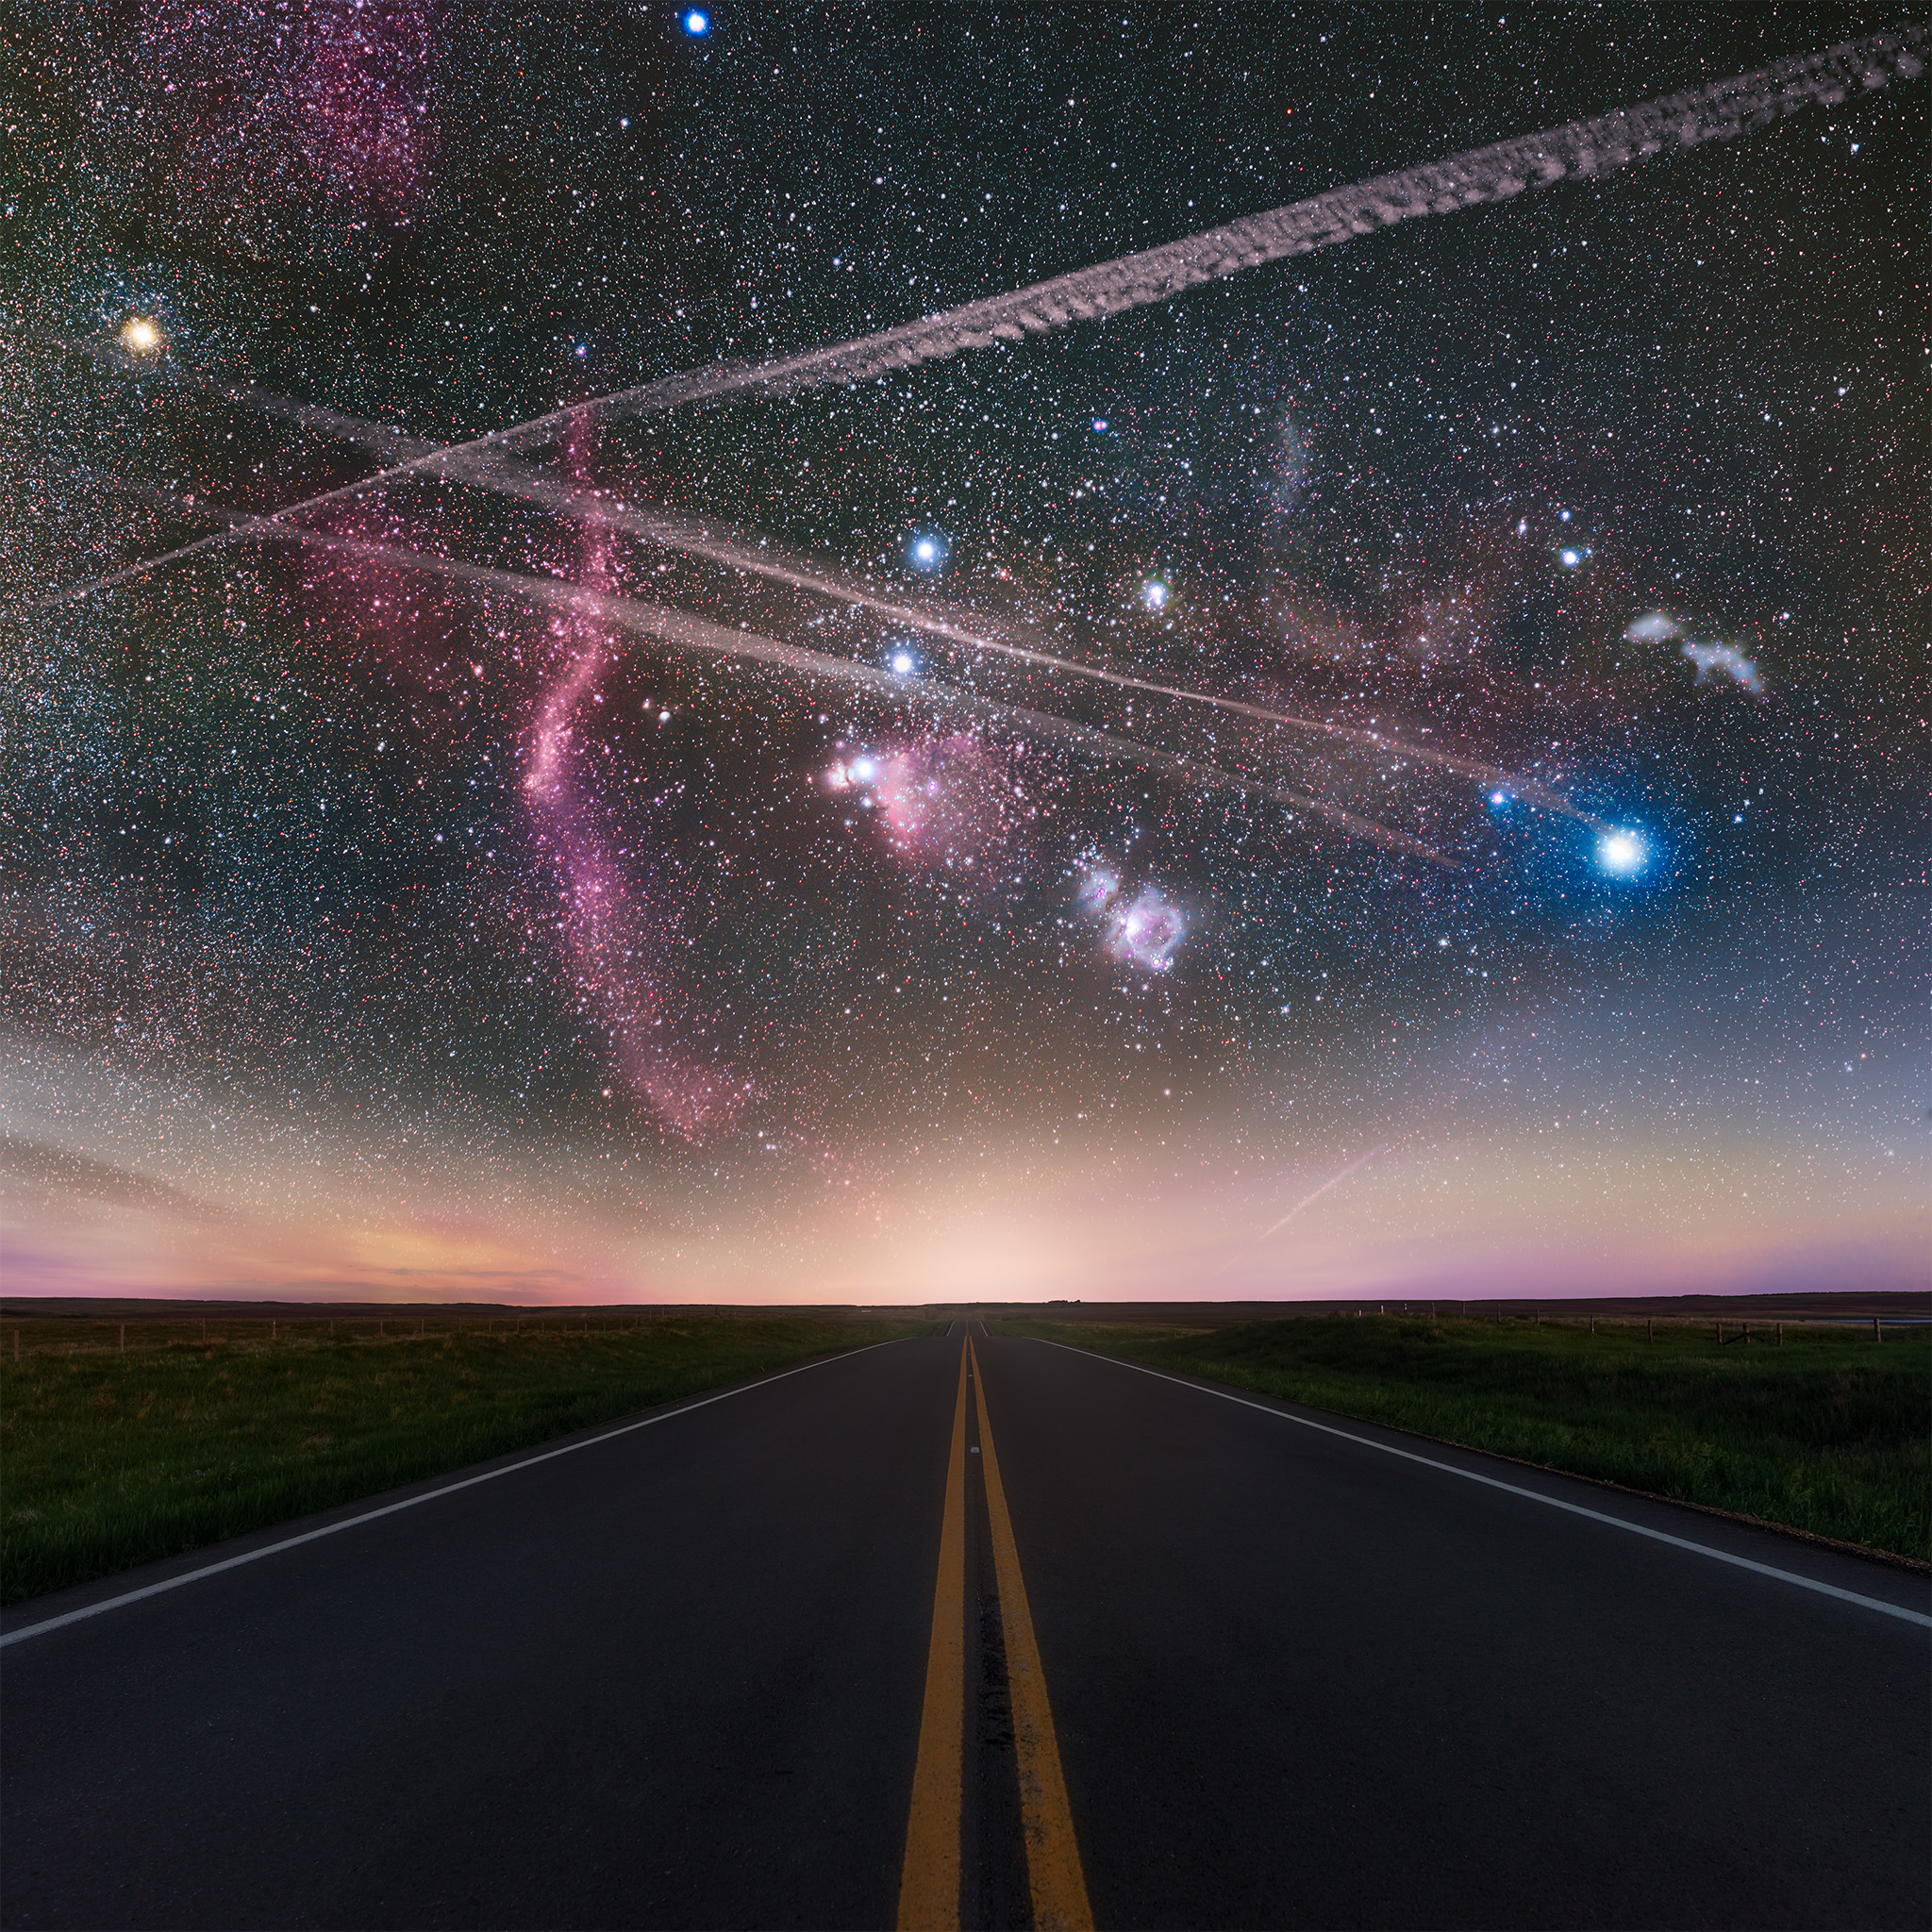 Landscape astrophotography in Saskatchewan of the Orion constellation over a road